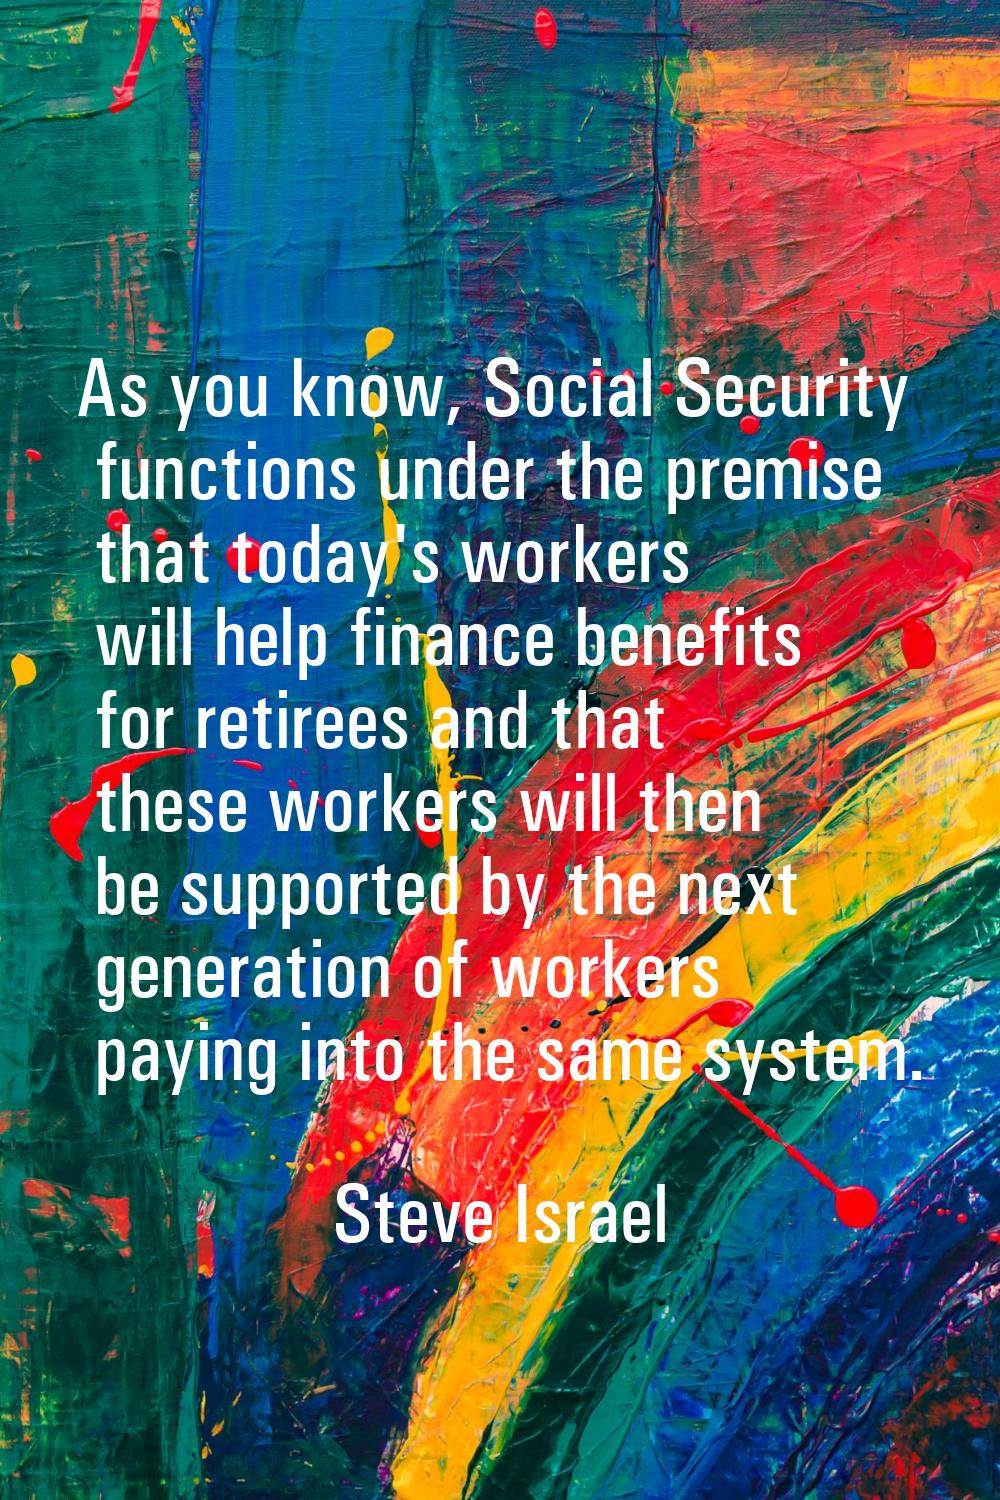 As you know, Social Security functions under the premise that today's workers will help finance ben